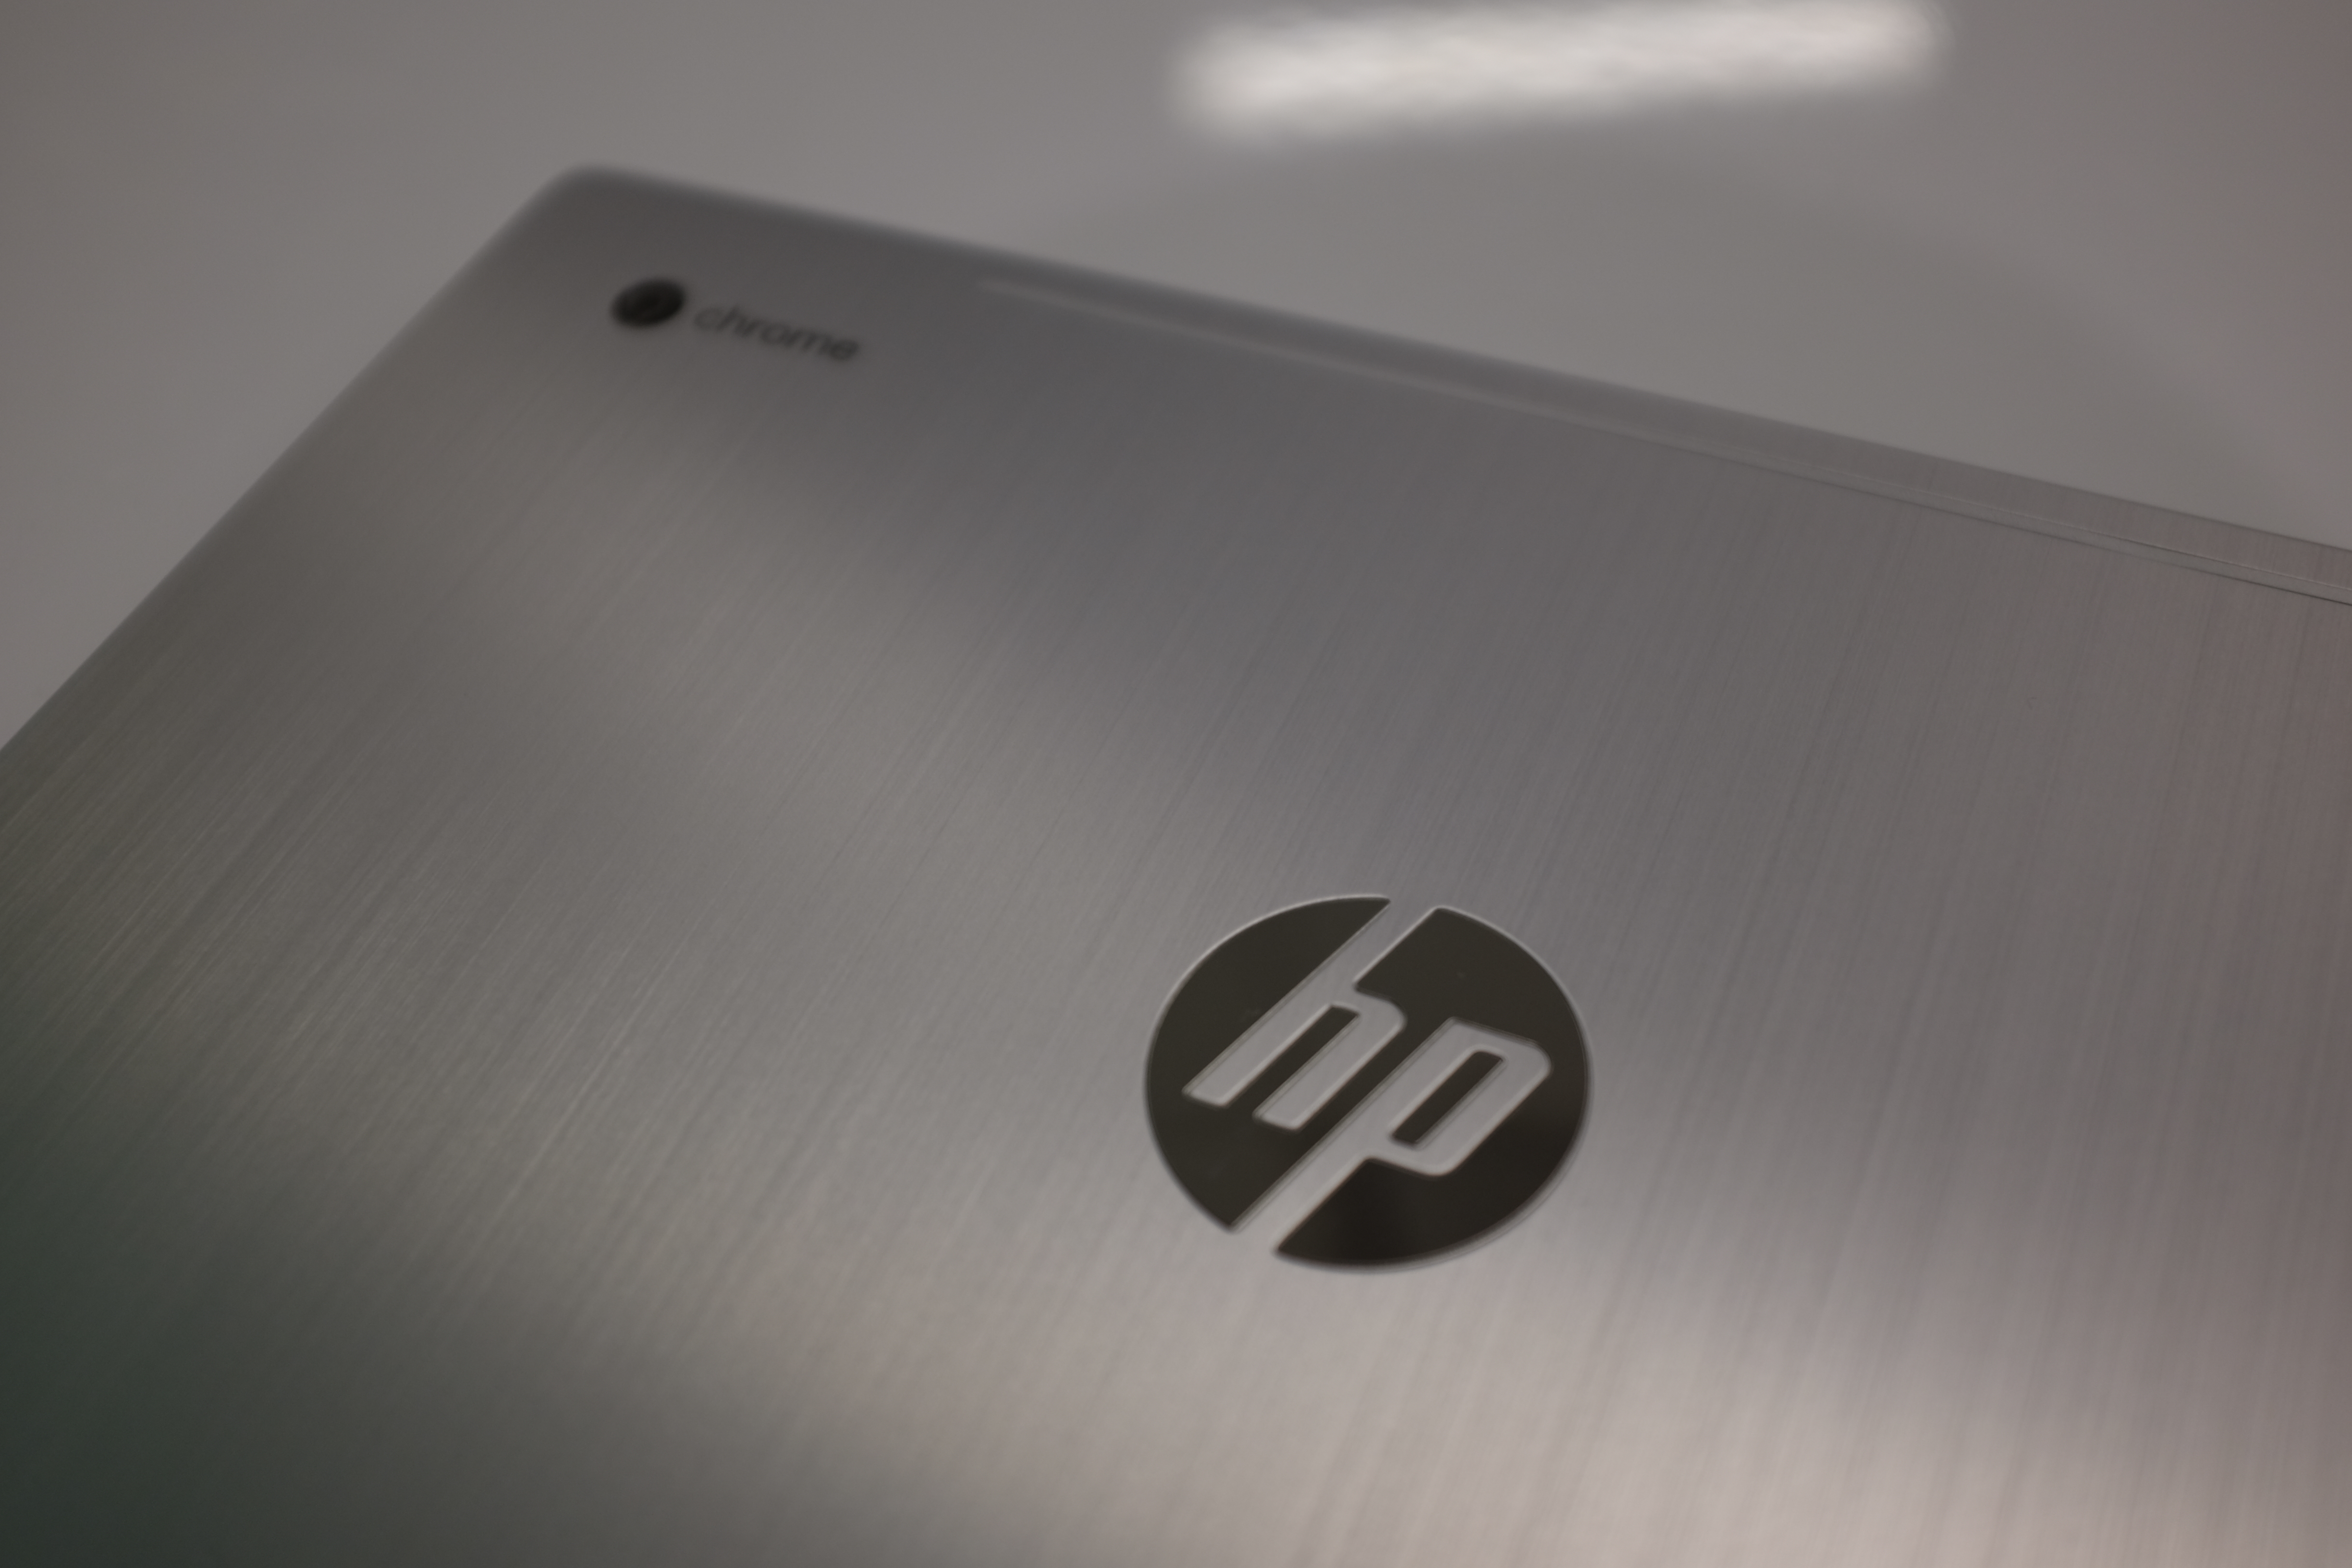 Some HP laptops are hiding a deactivated keylogger